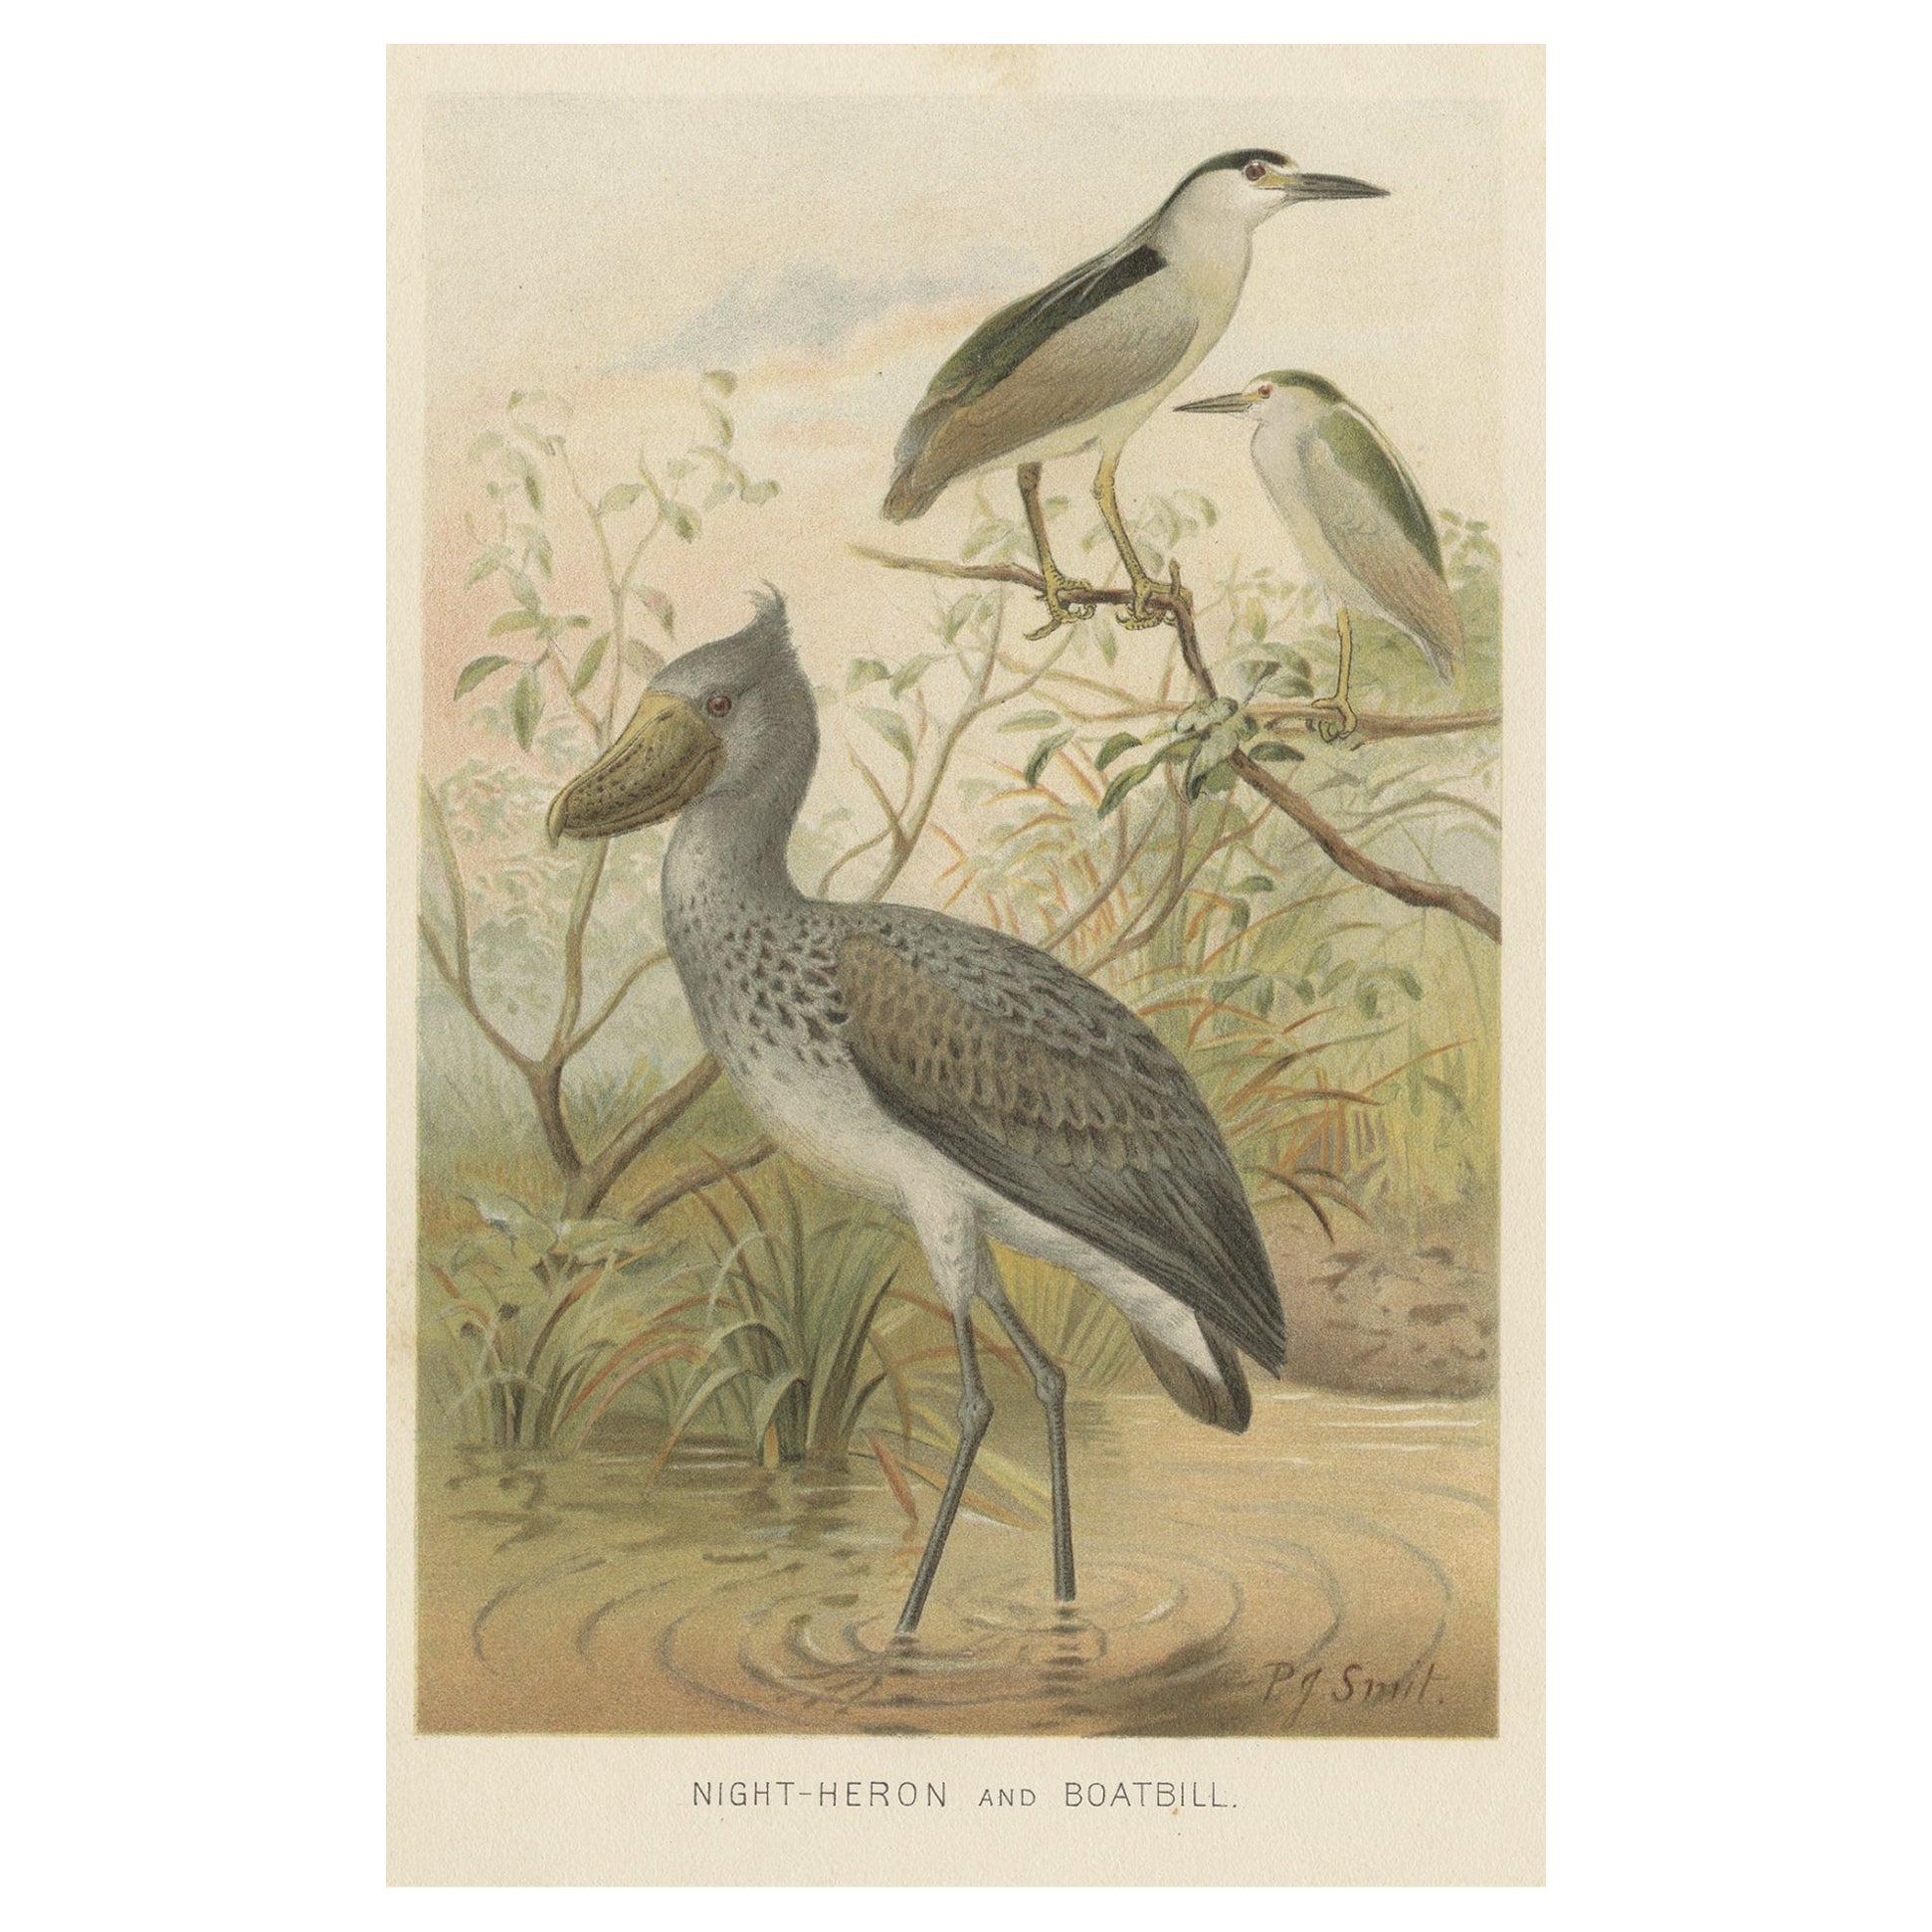 Authentic Chromolithograph Depicting a Night-Heron and Boatbill, 1895 For Sale